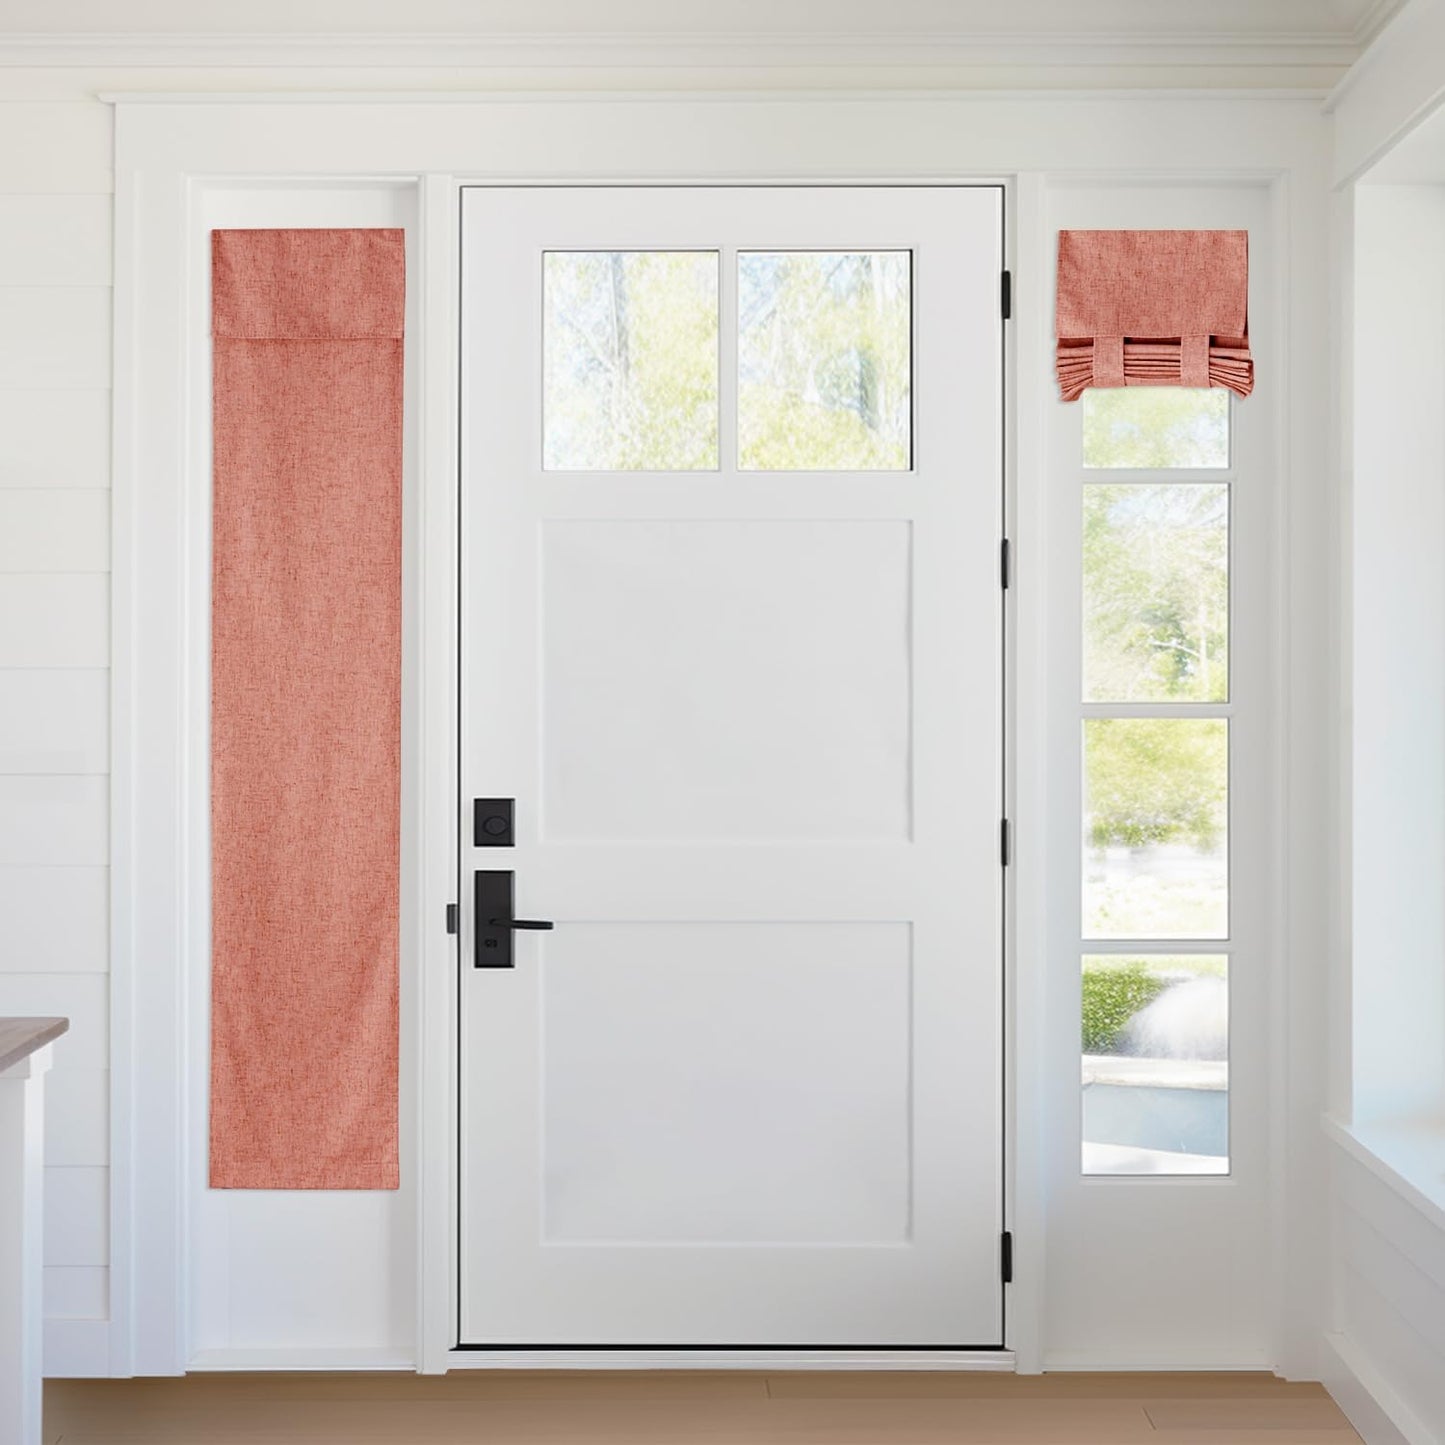 RYB HOME Blackout French Door Curtains, Room Darkening Shades Small Door Window Curtains and Drapes Thermal Insulated Tricia Door Blinds for Patio Door Doorway, W26 X L40 Inch, 1 Panel, Gray  RYB HOME Brick Red 12" X 69" 